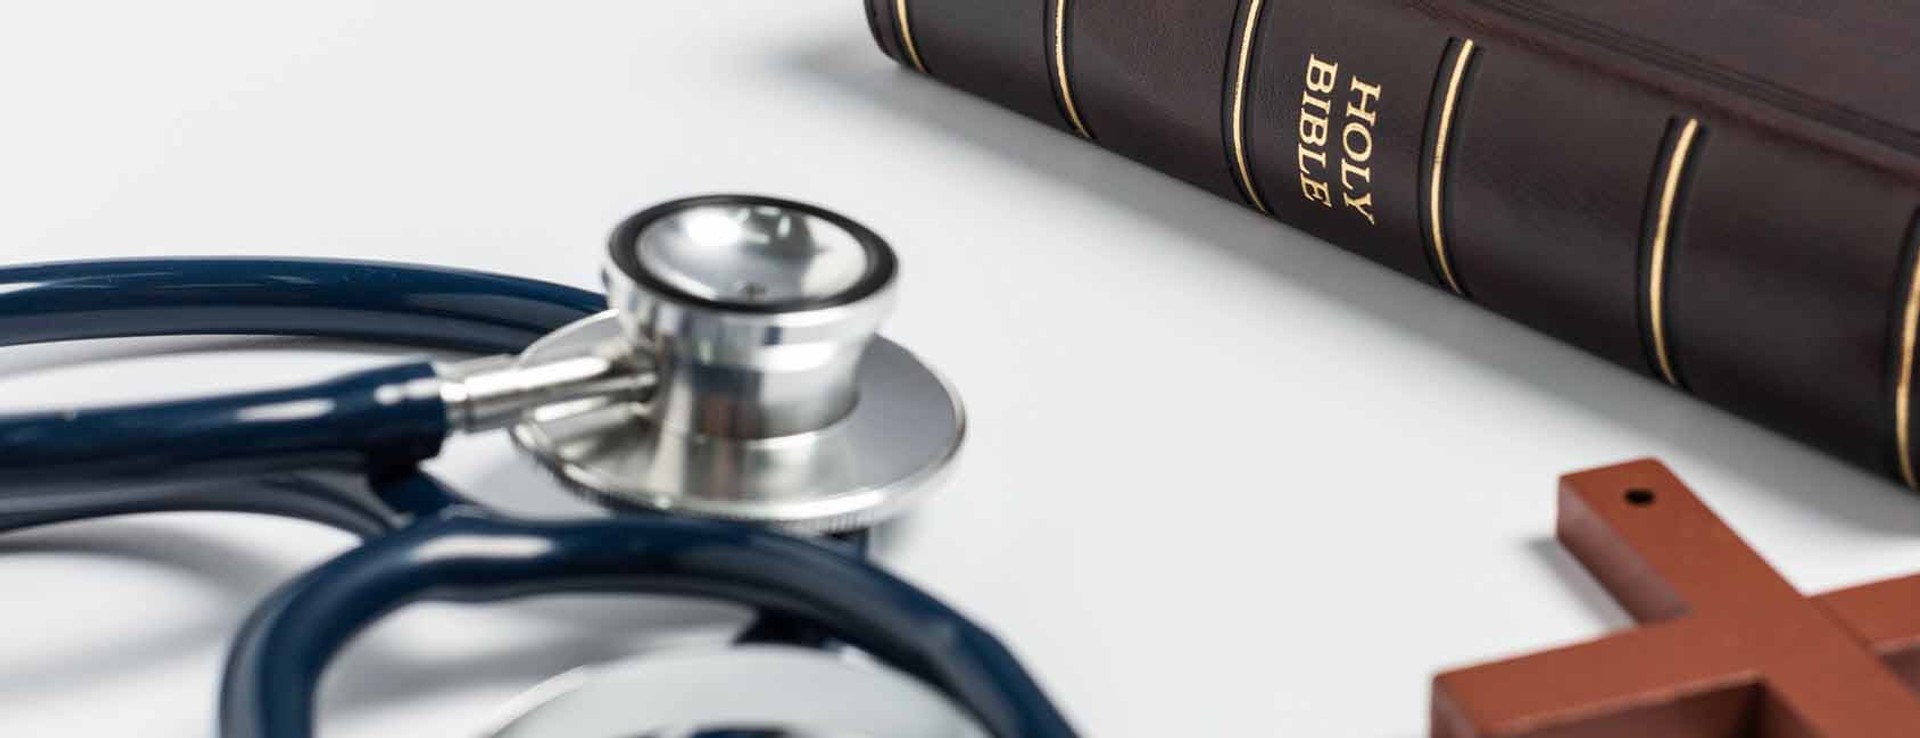 Bible, cross and stethoscope